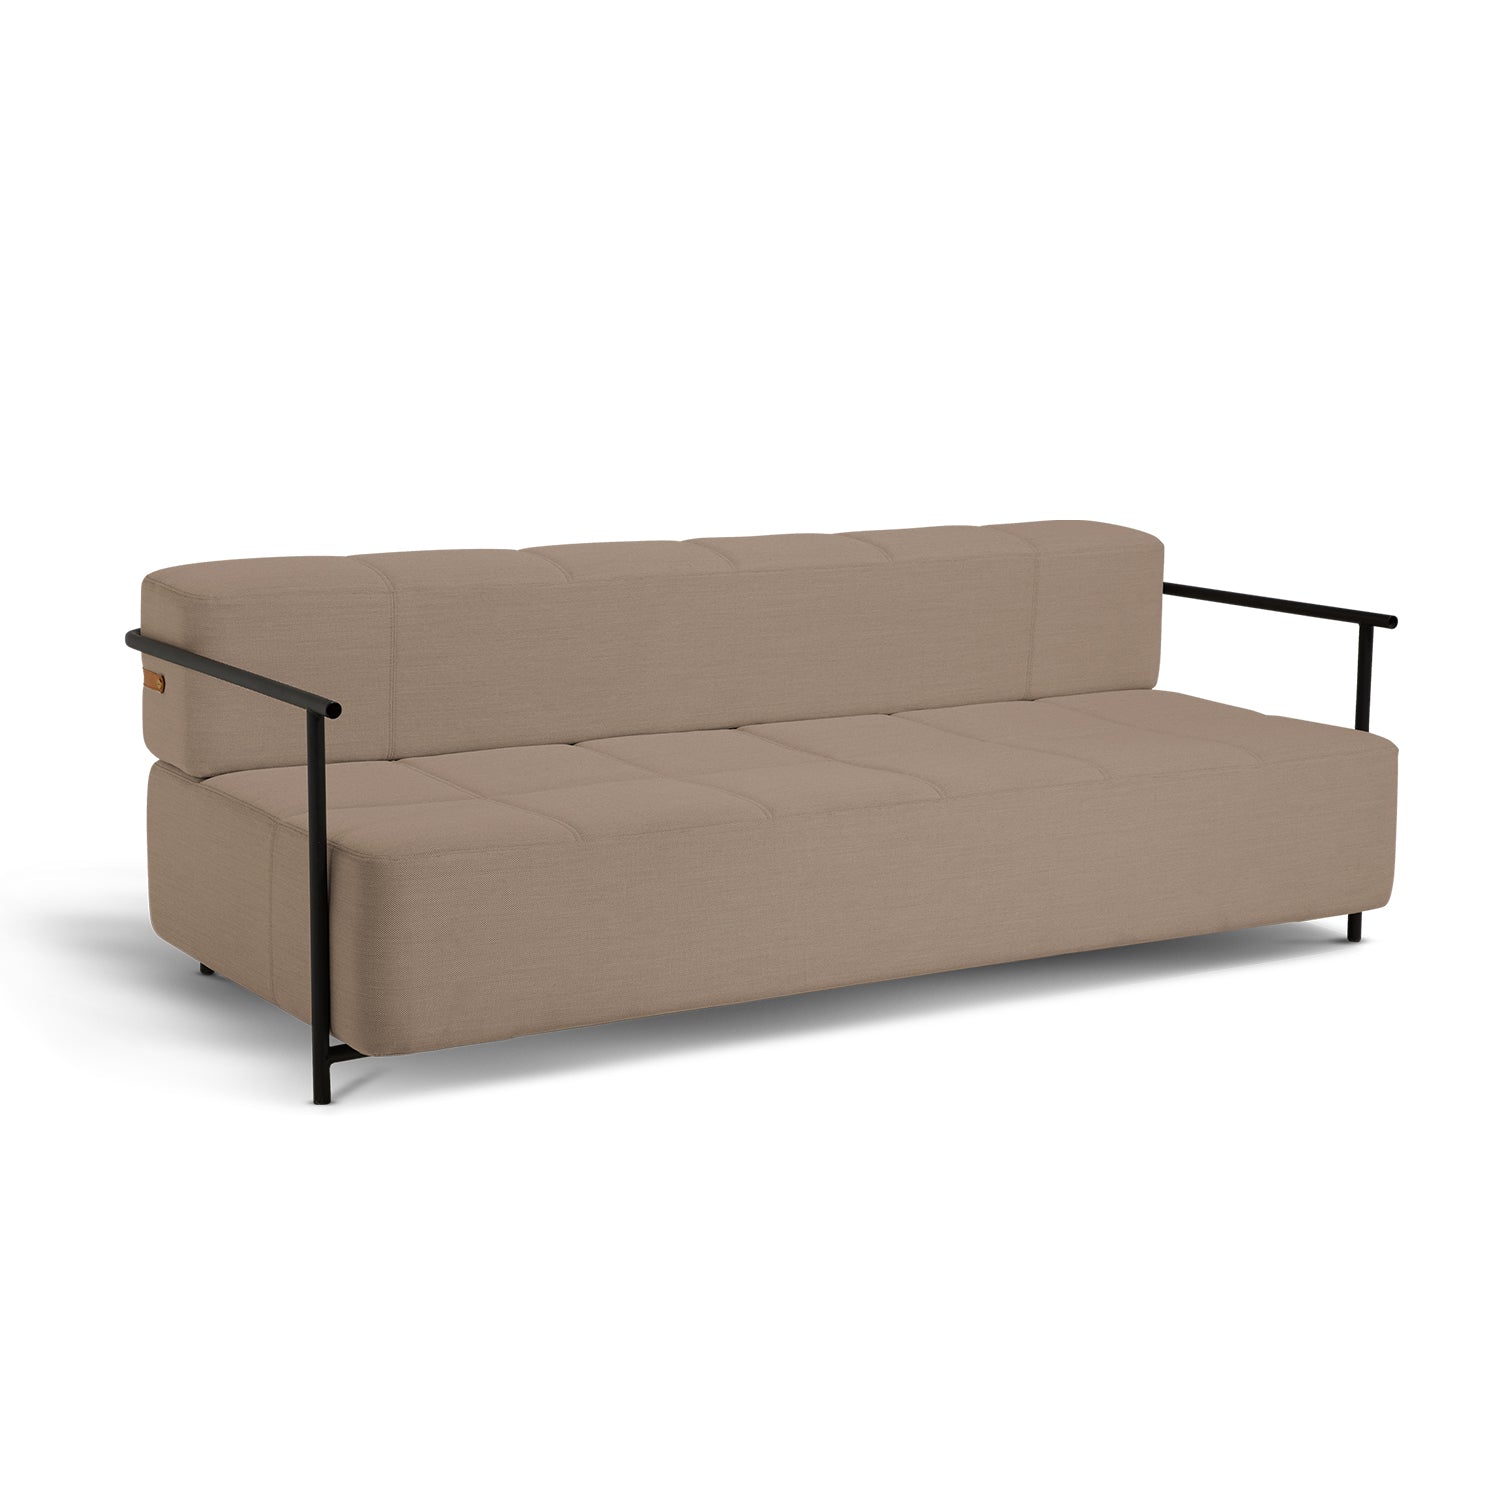 Northern Daybe Sofabed with Armrest in Light Brown